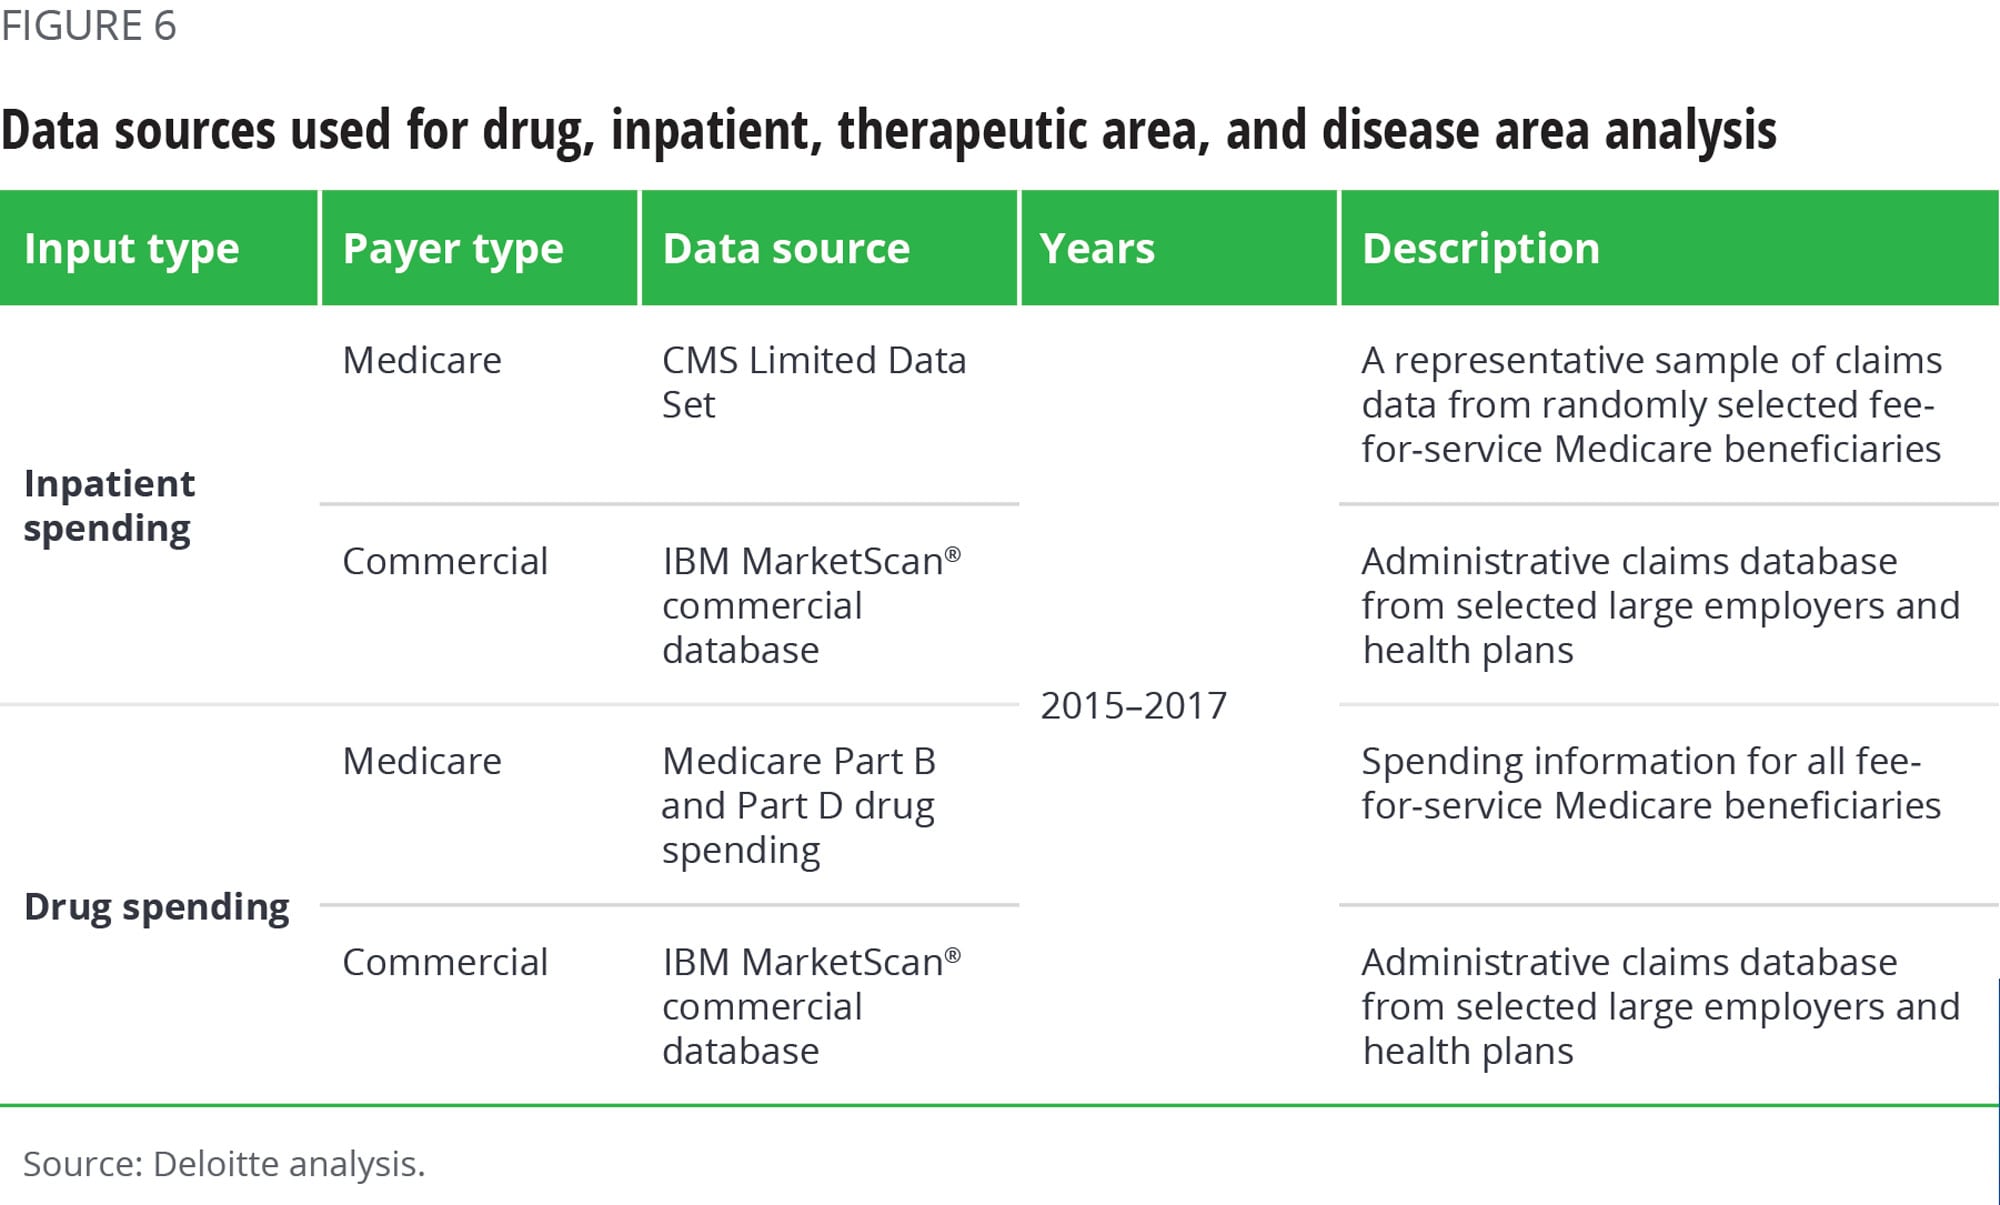 Data sources used for drug, inpatient, therapeutic area, and disease area analysis.